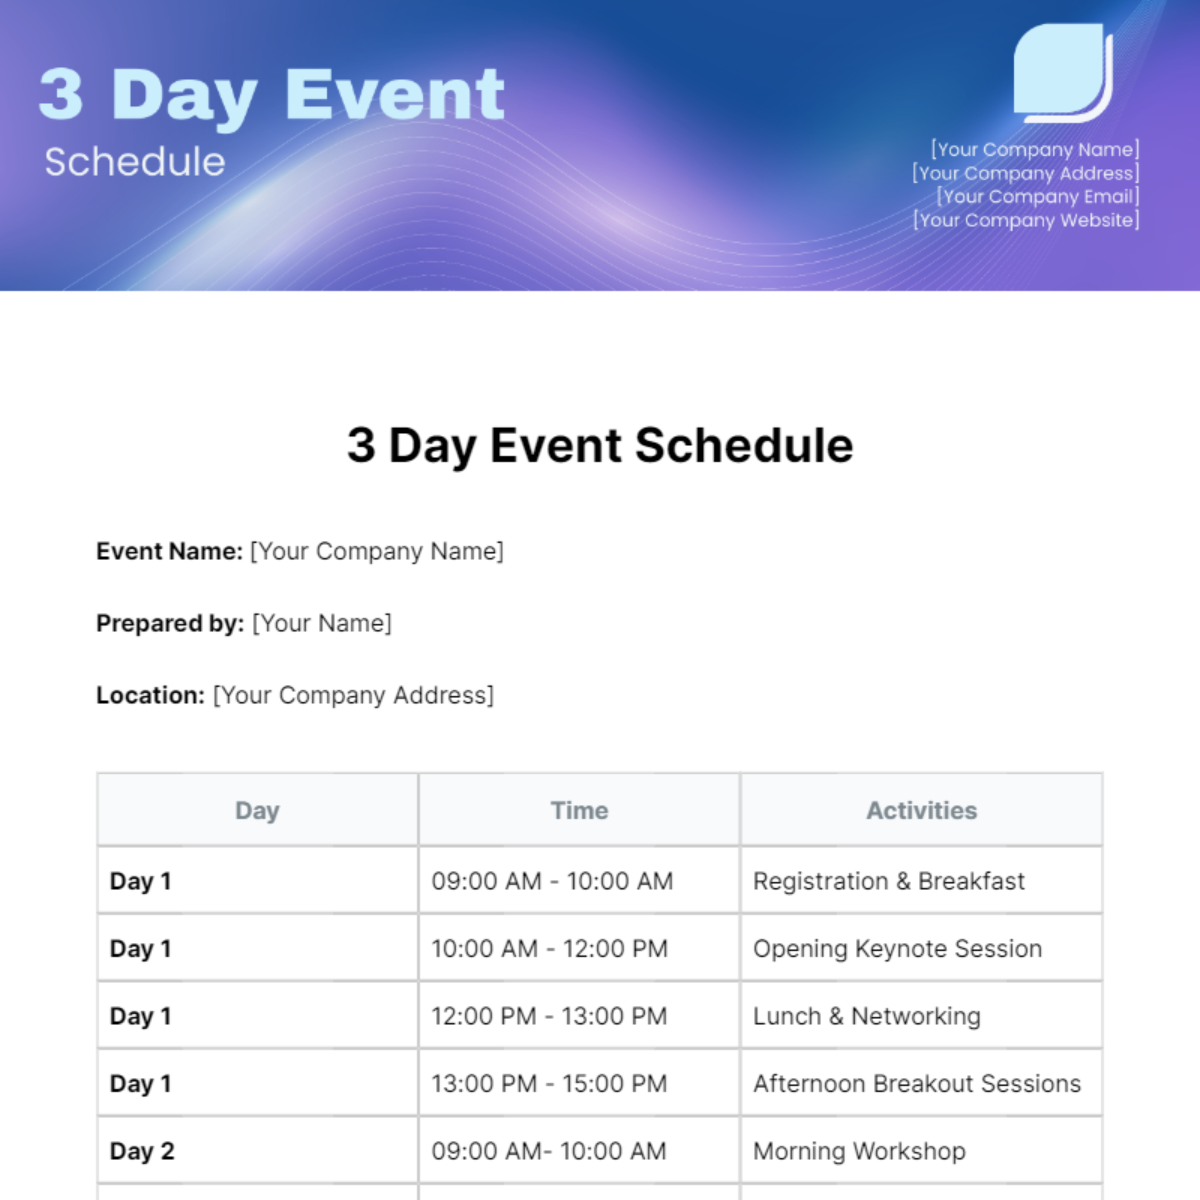 3 Day Event Schedule Template